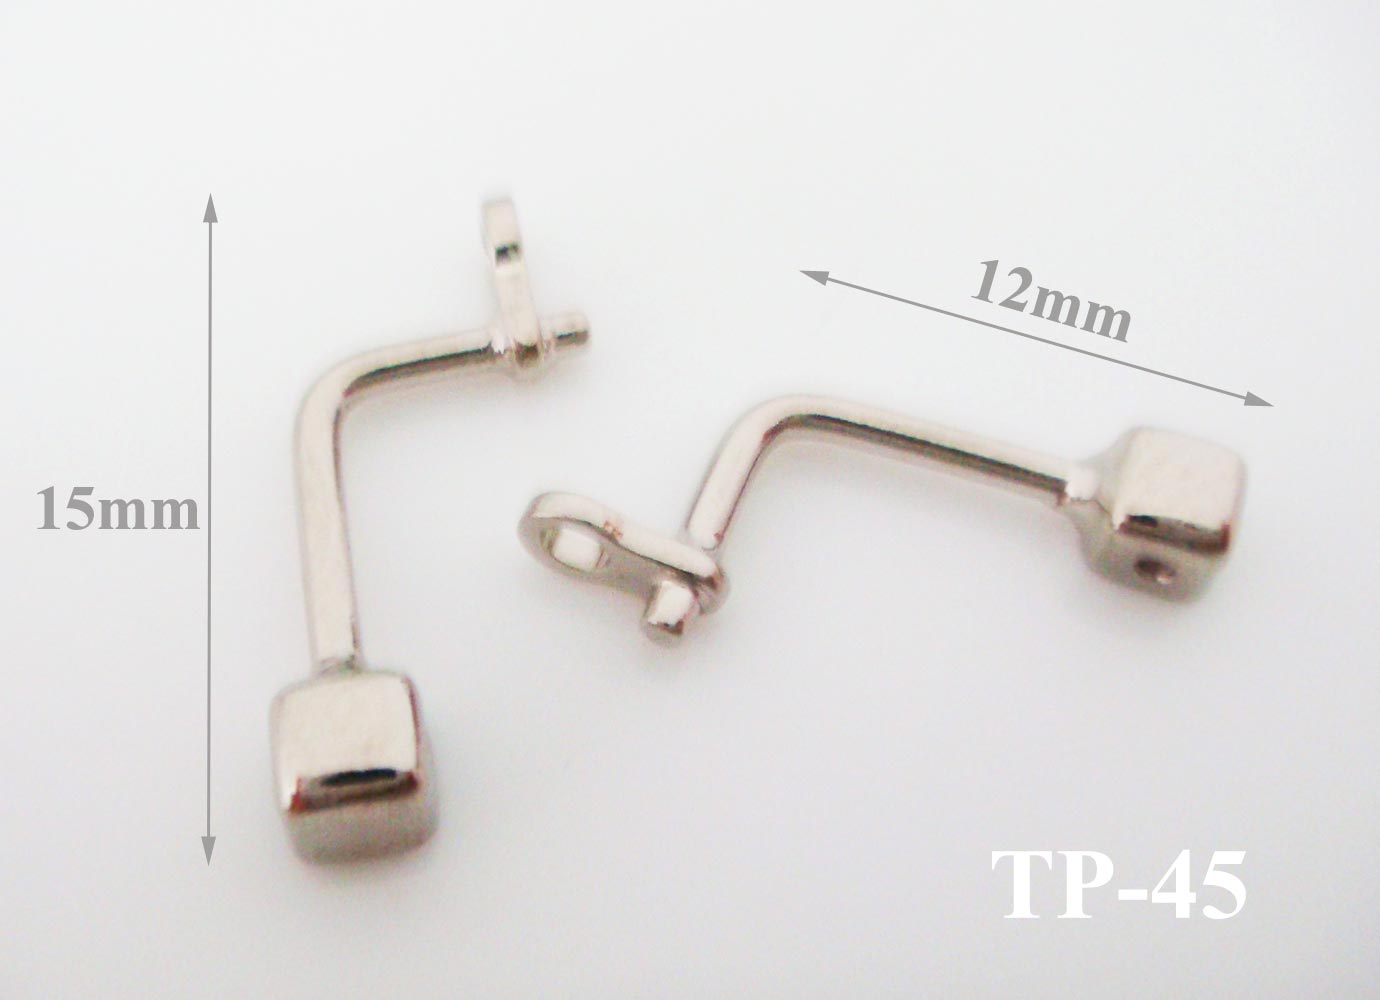 nose pad arms for plastic wood 3D printed eyeglass frames 12mm